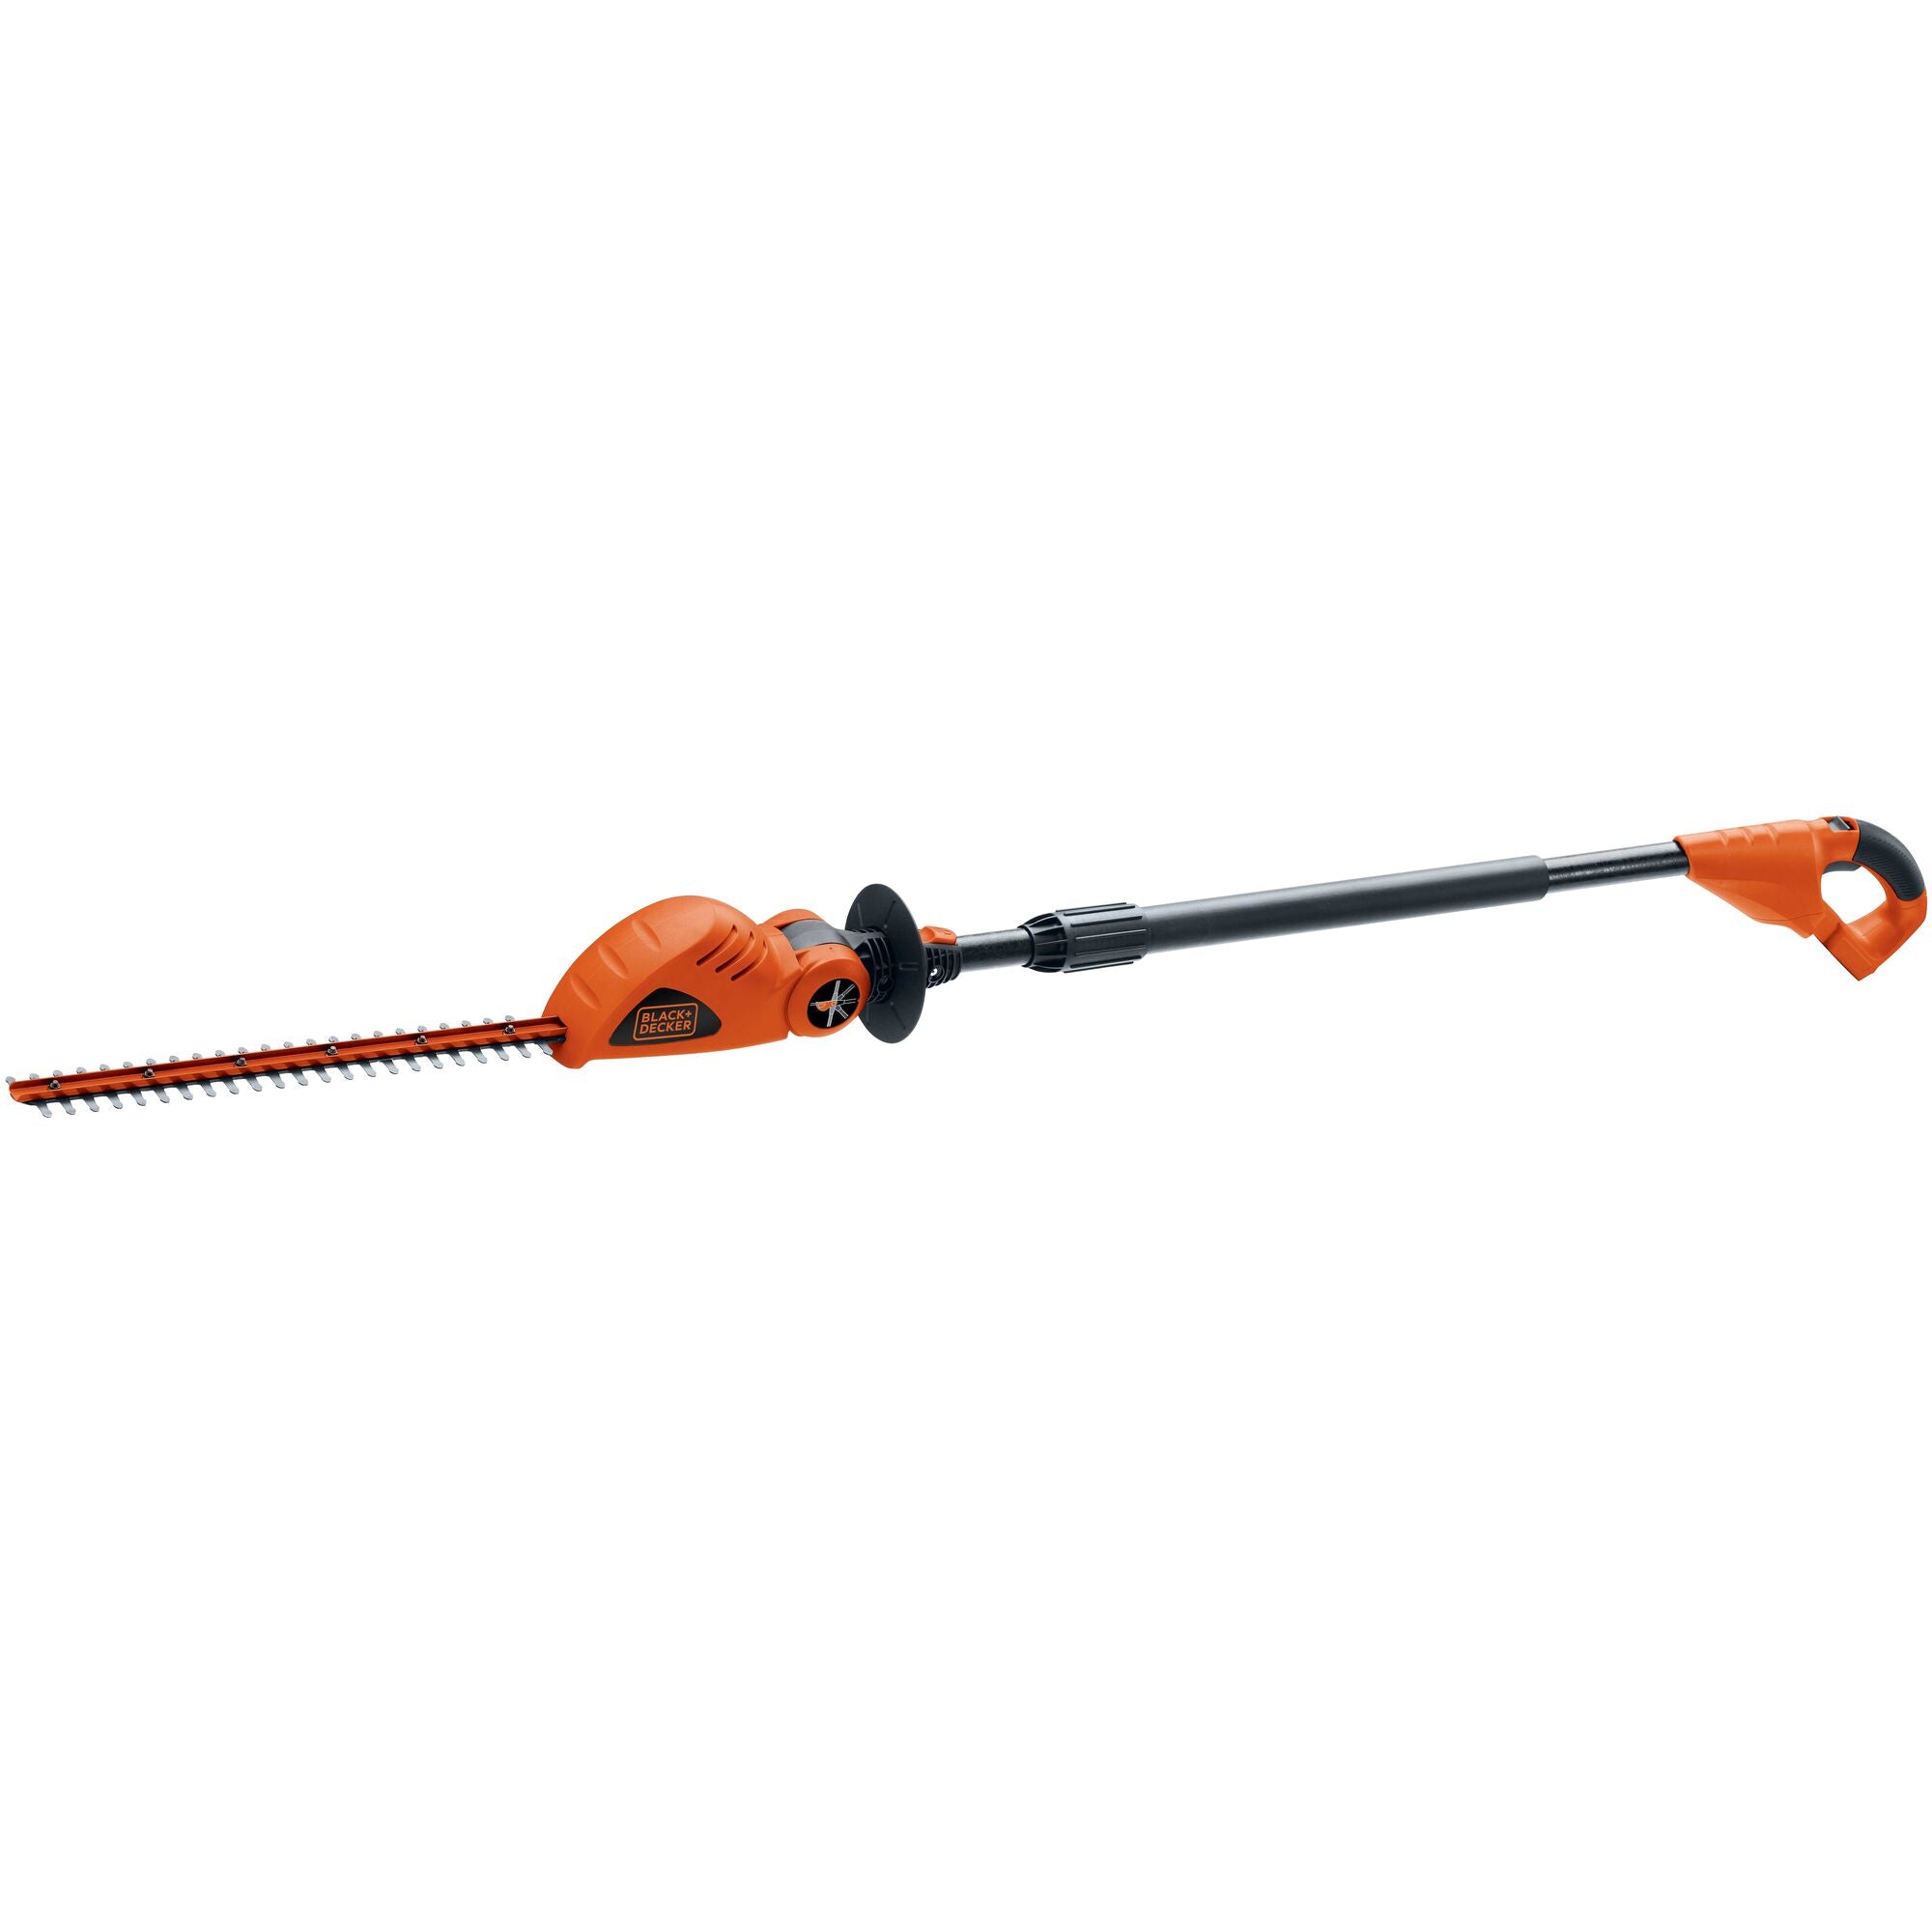 An overview of the BLACK+DECKER 20V MAX* POWERCONNECT™ 18-in. Cordless Pole Hedge Trimmer (Tool Only).